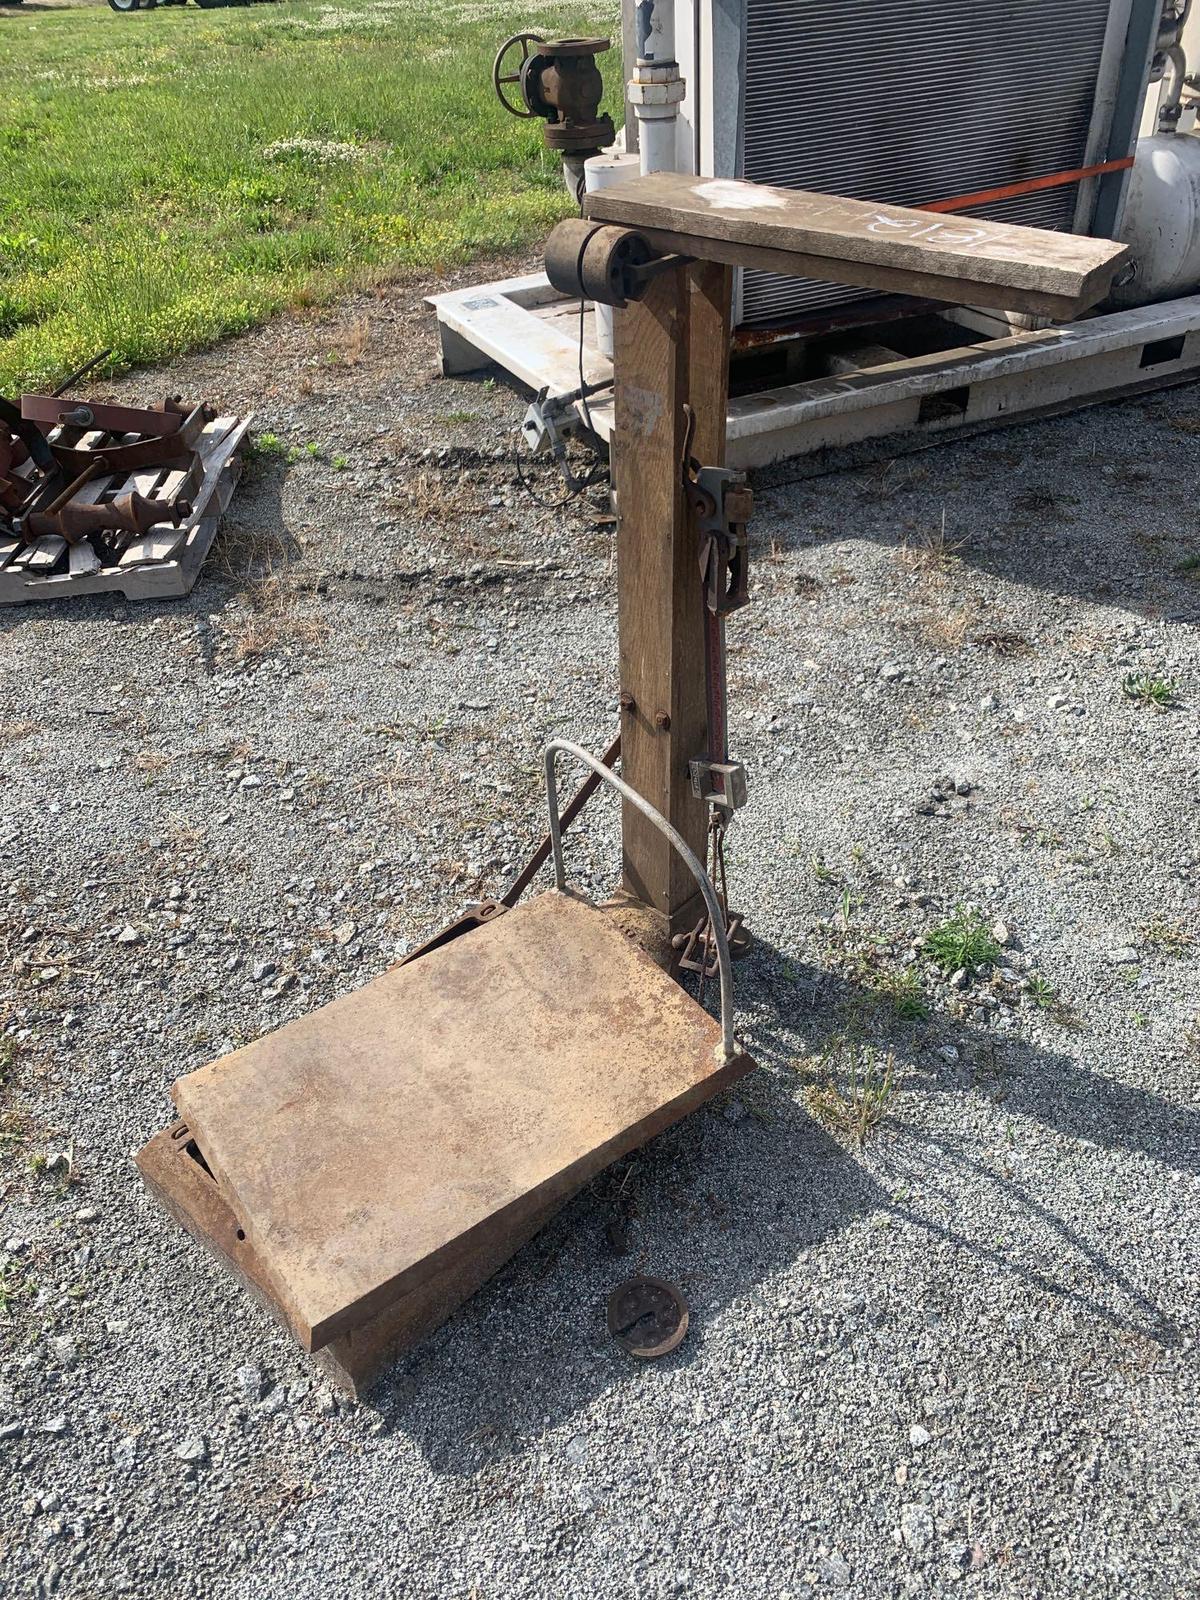 Howe Antique Scale